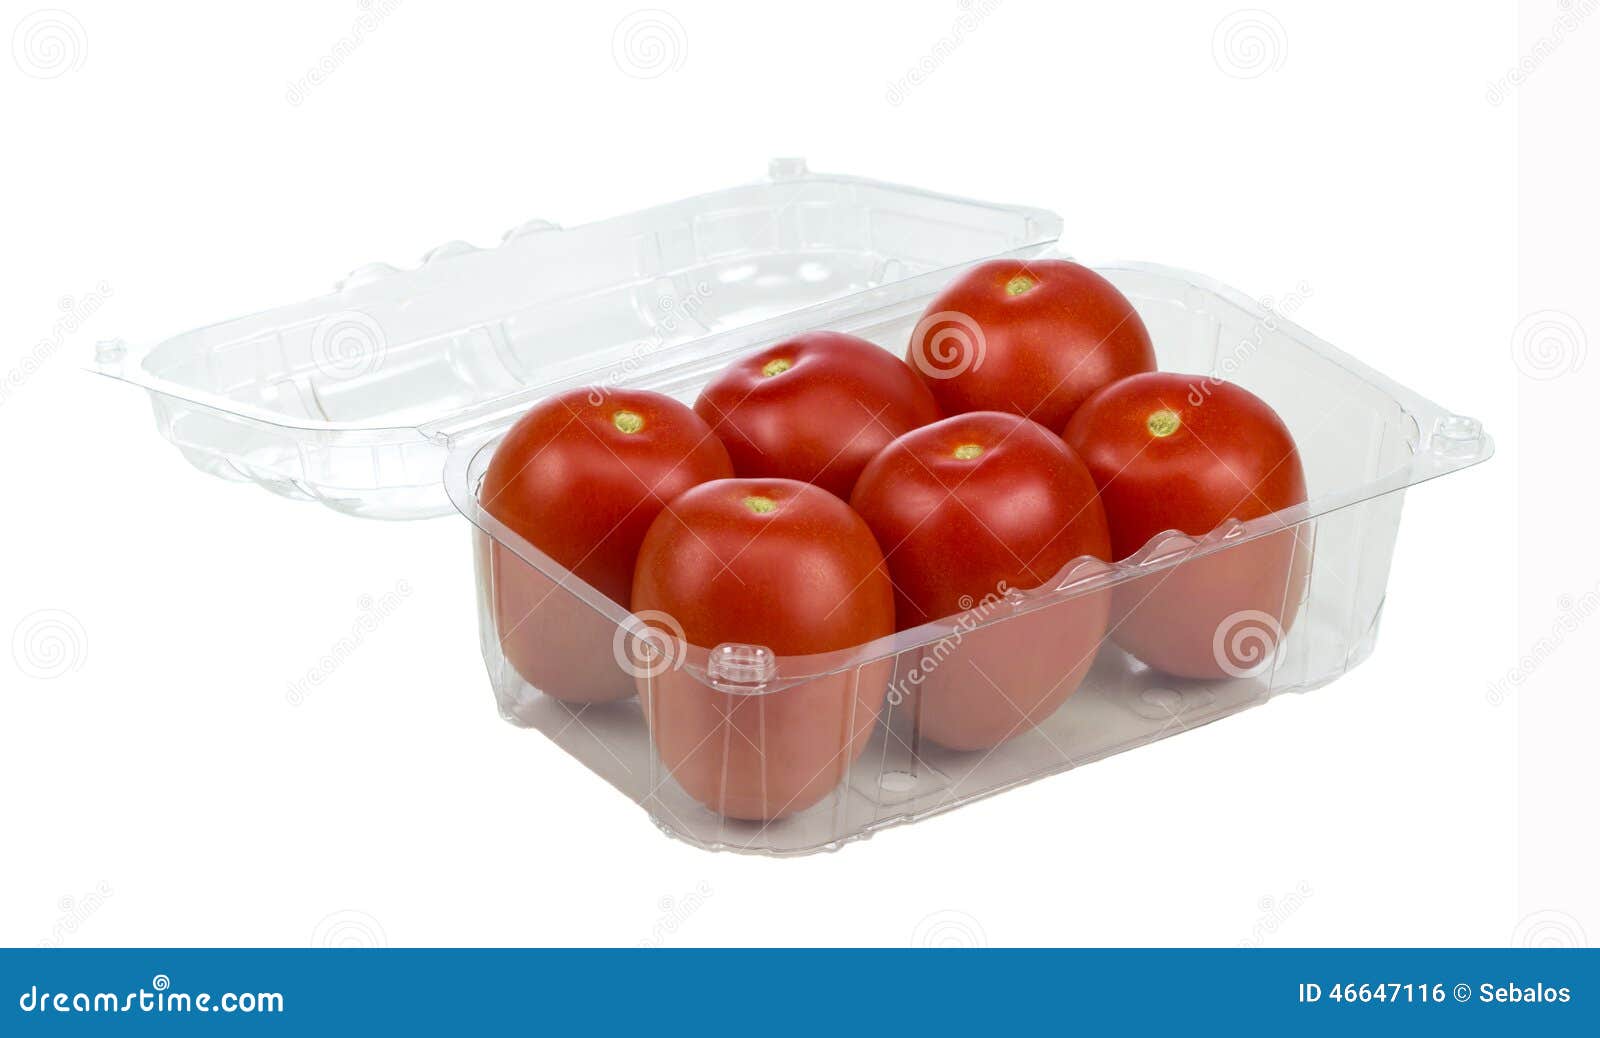 Download 433 Tomatoes Plastic Tray Photos Free Royalty Free Stock Photos From Dreamstime Yellowimages Mockups